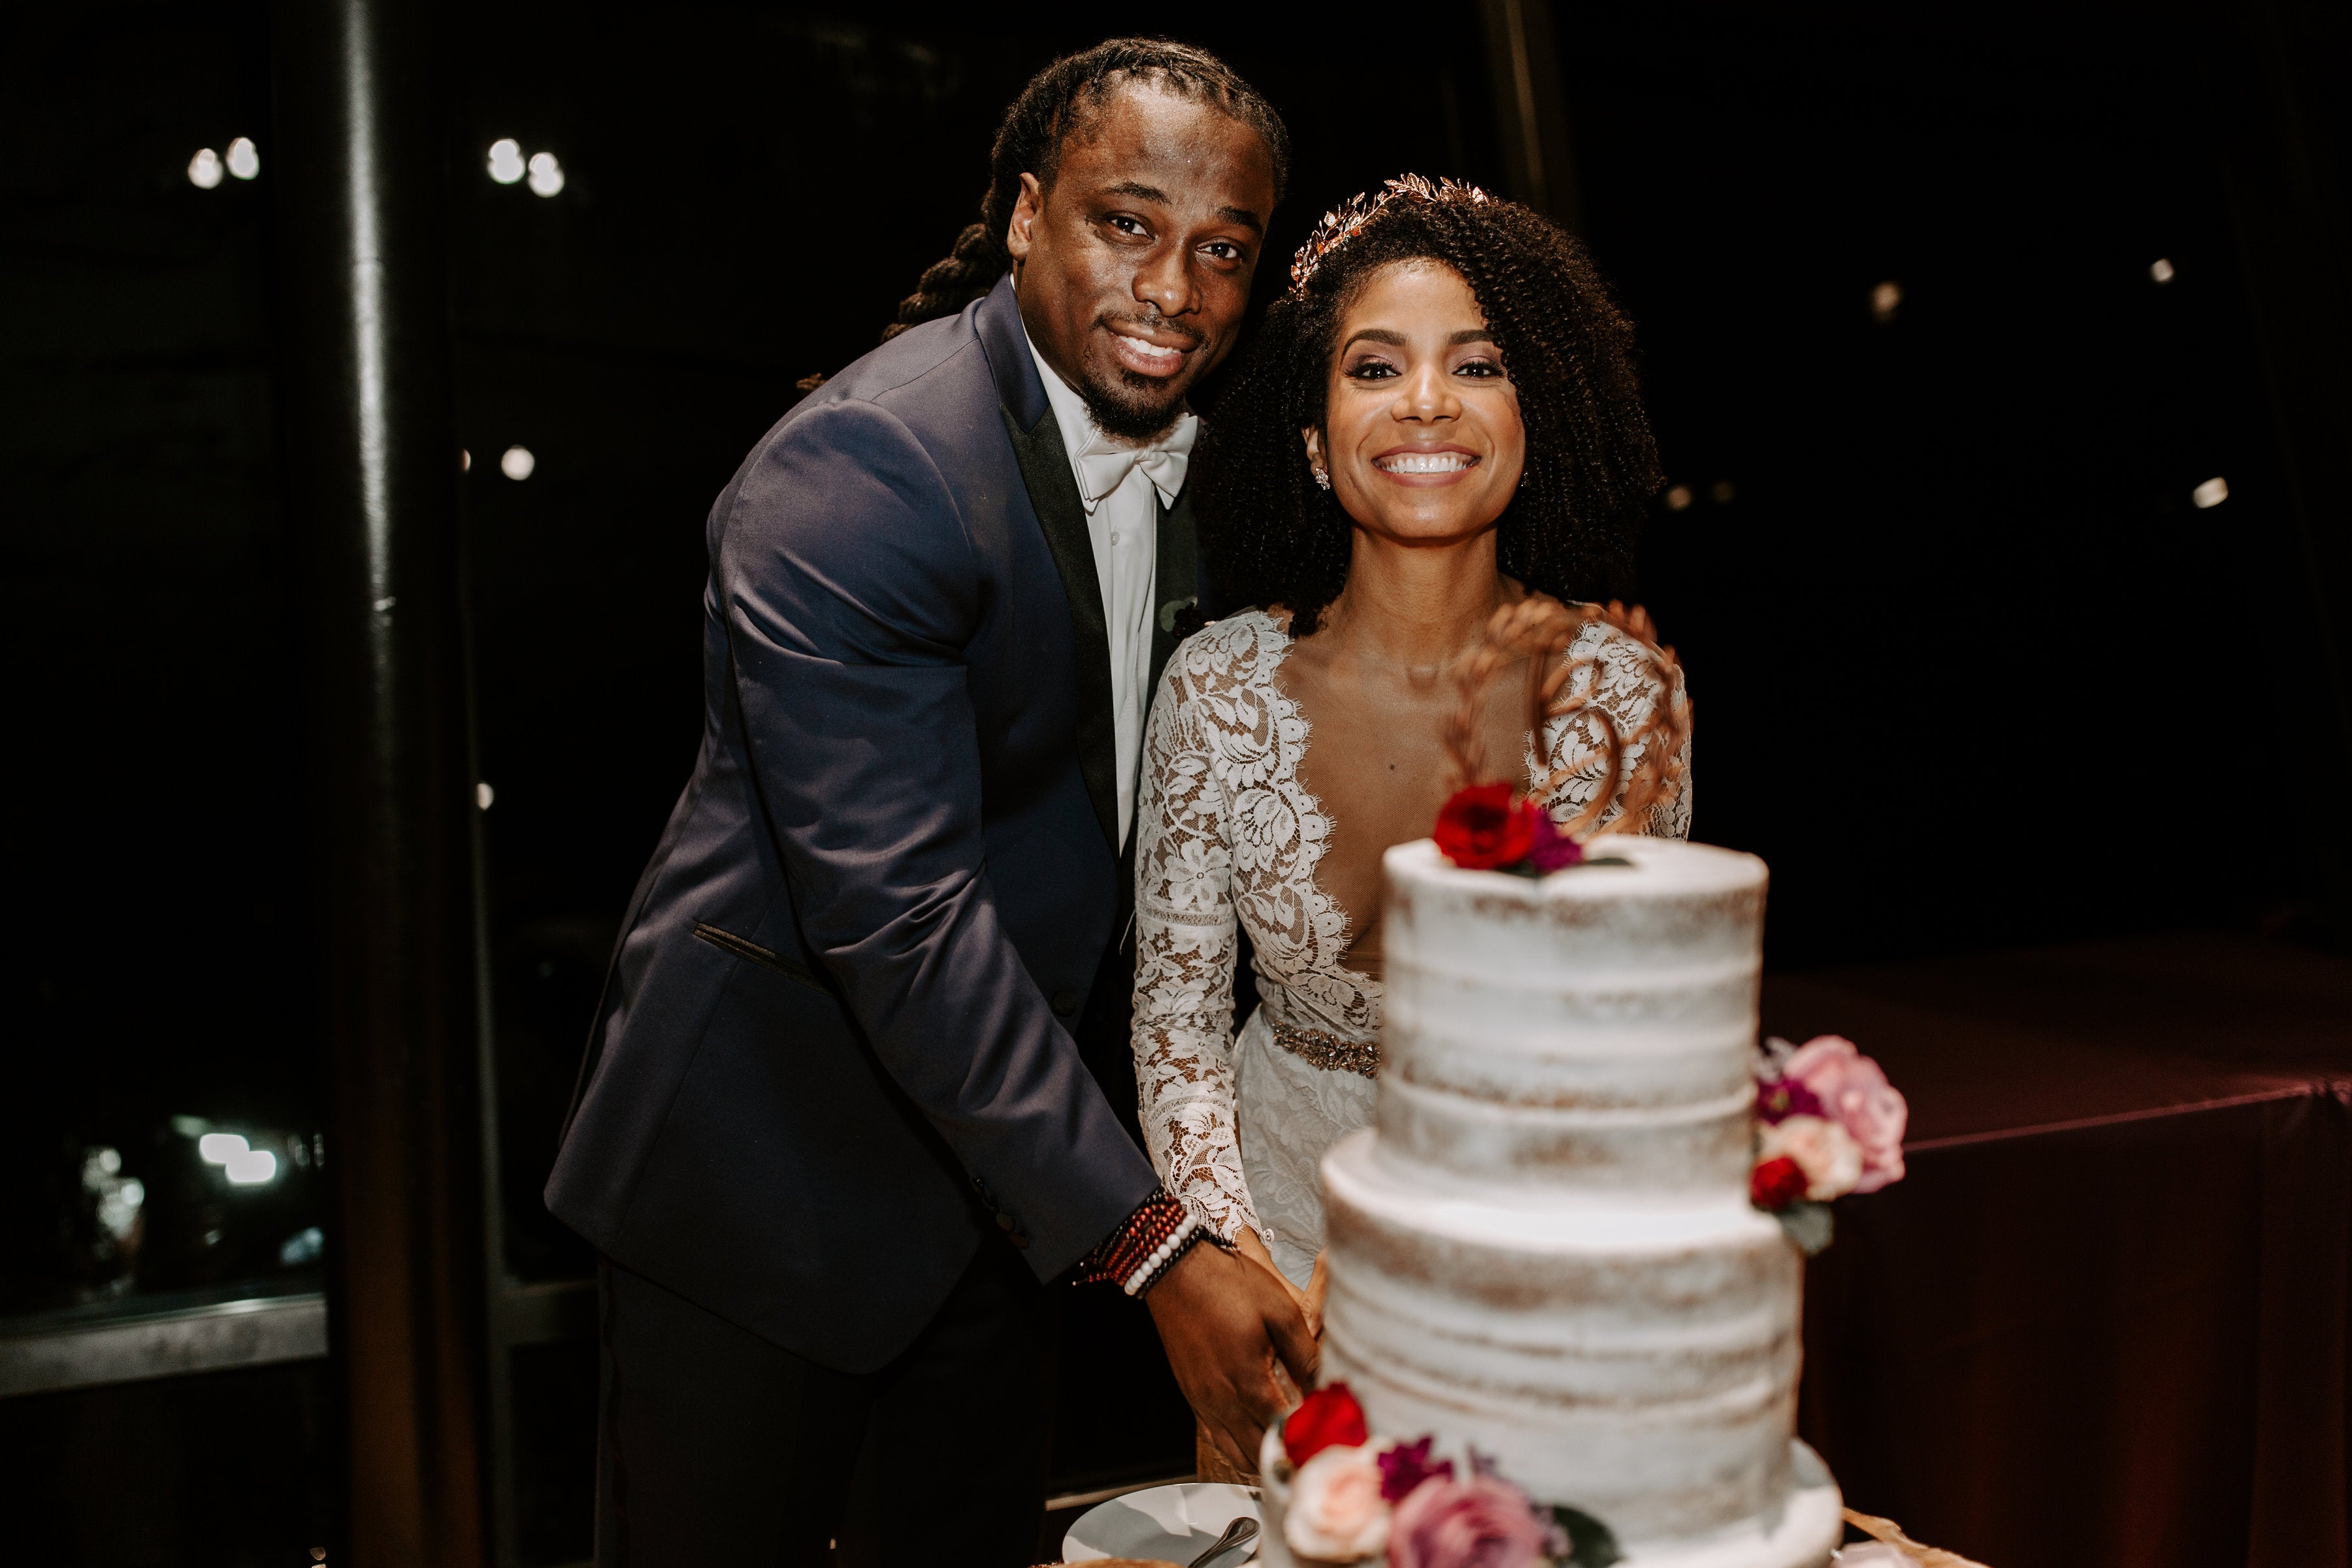 Bridal Bliss: One Look At Rawle And Crystal's Stunning Dallas Wedding And You'll Love It As Much As We Do
